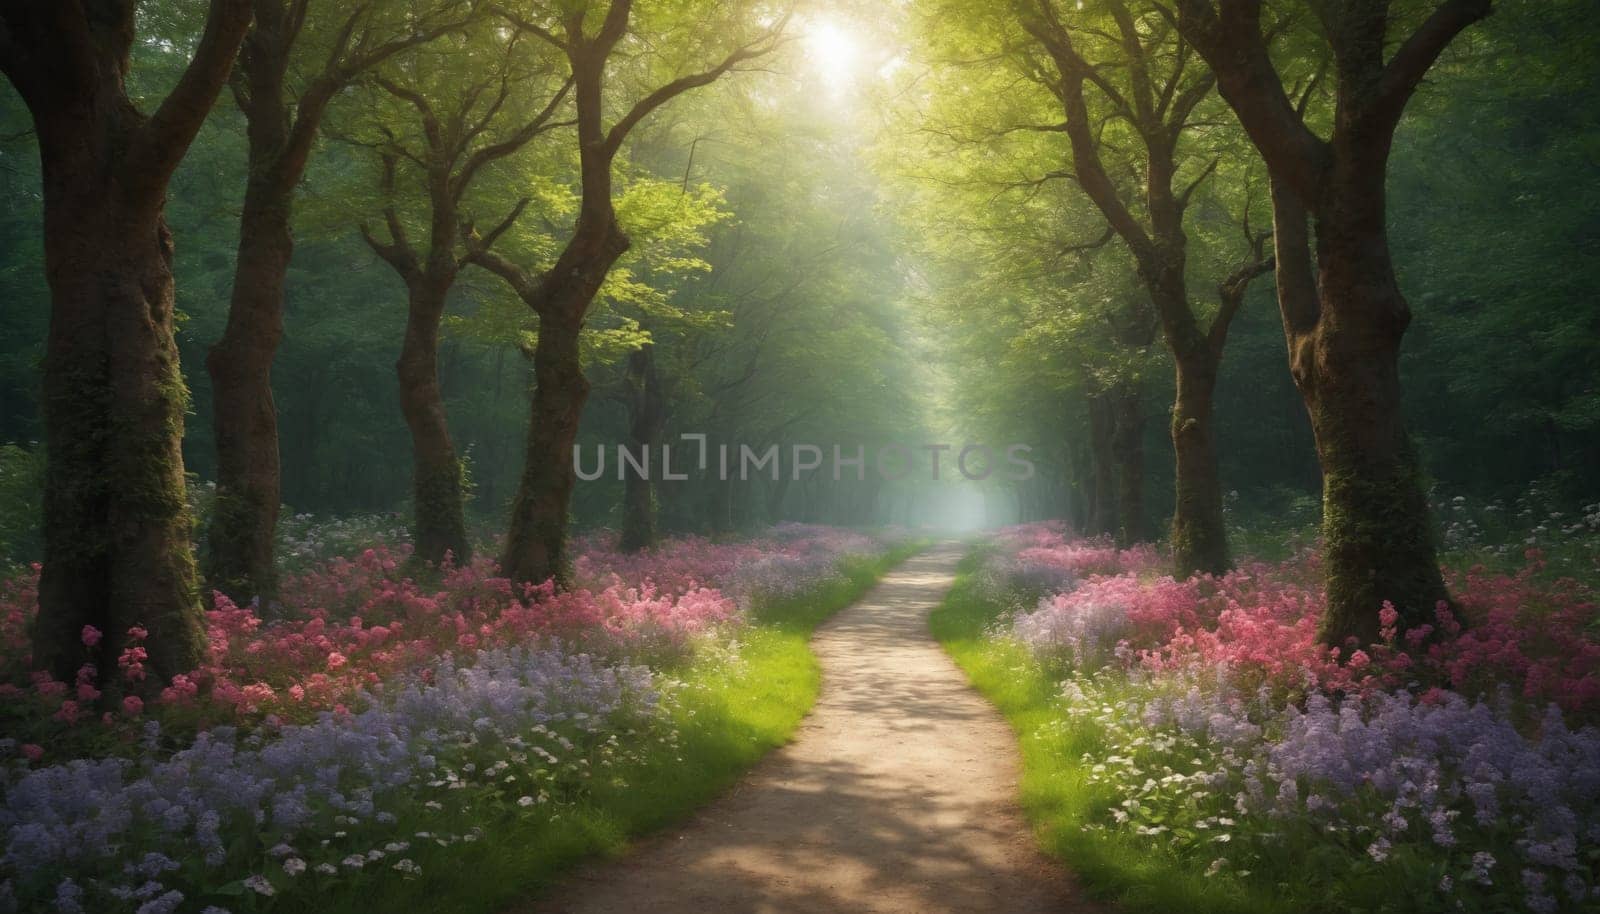 A winding dirt path cuts through a lush forest, lined with vibrant wildflowers and shrouded in a mystical mist. Sunlight streams through the trees, creating a serene and ethereal atmosphere.